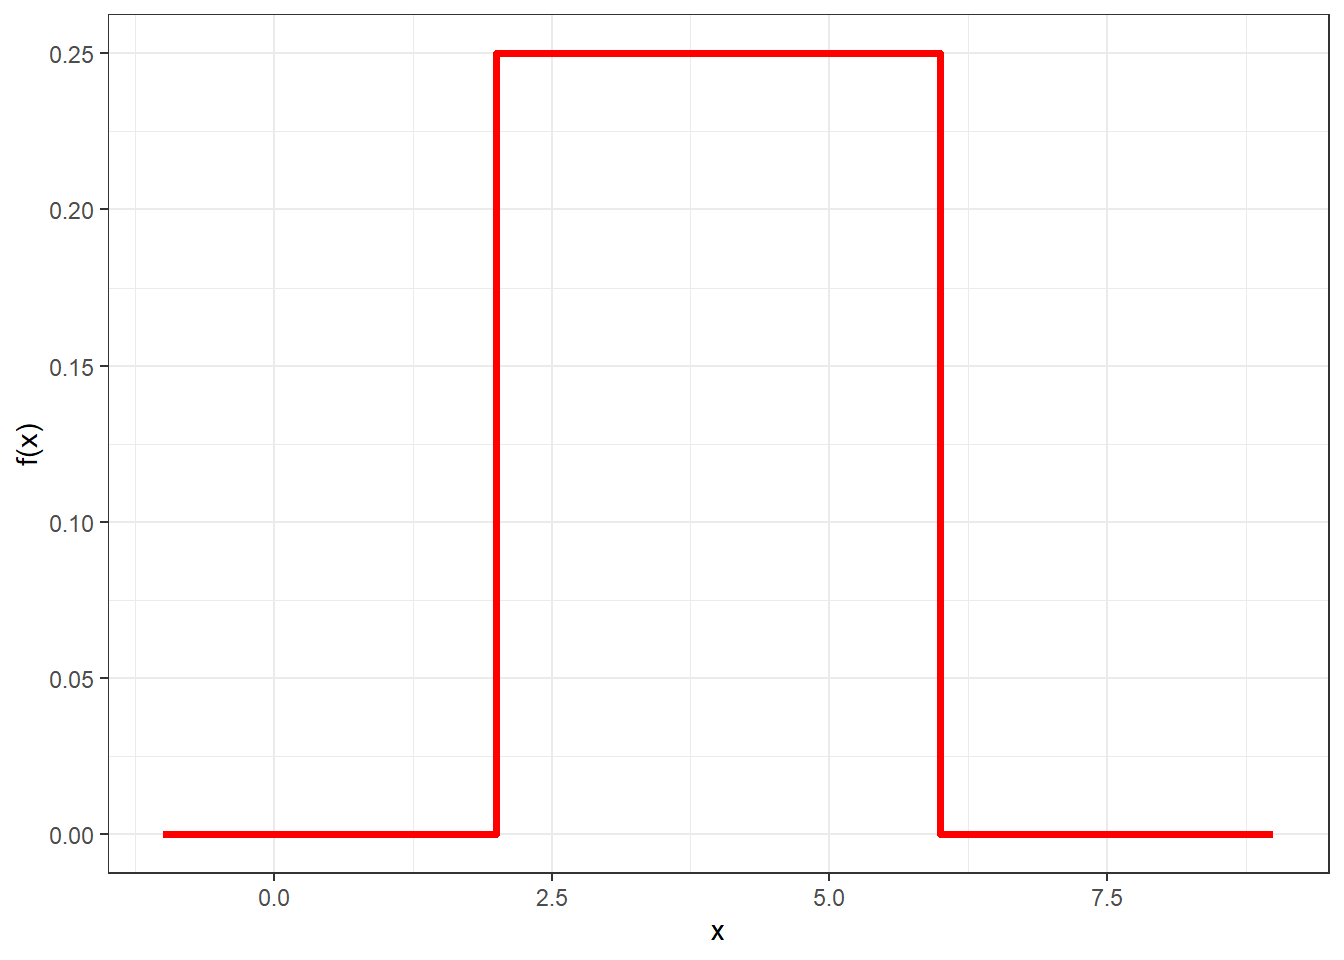 Probability density function for a uniform random variable with parameters a = 2 and b = 6